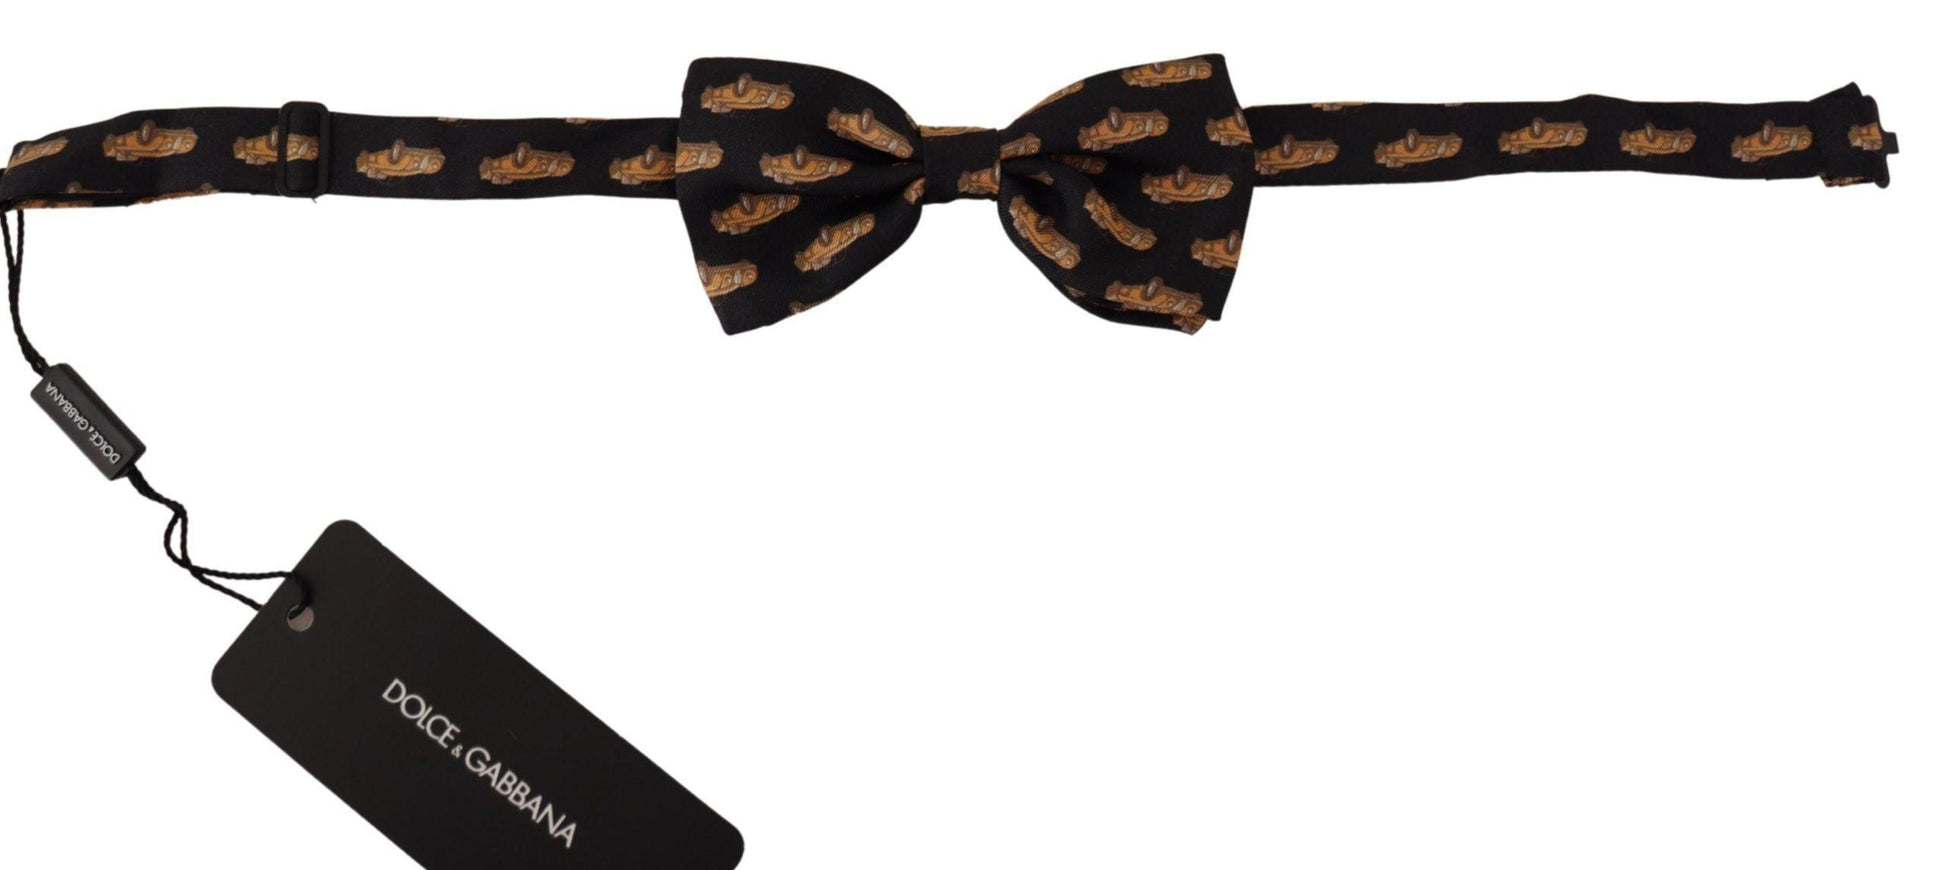 Dolce & Gabbana Black Orange Car print Adjustable Neck Papillon Bow Tie - Designed by Dolce & Gabbana Available to Buy at a Discounted Price on Moon Behind The Hill Online Designer Discount S